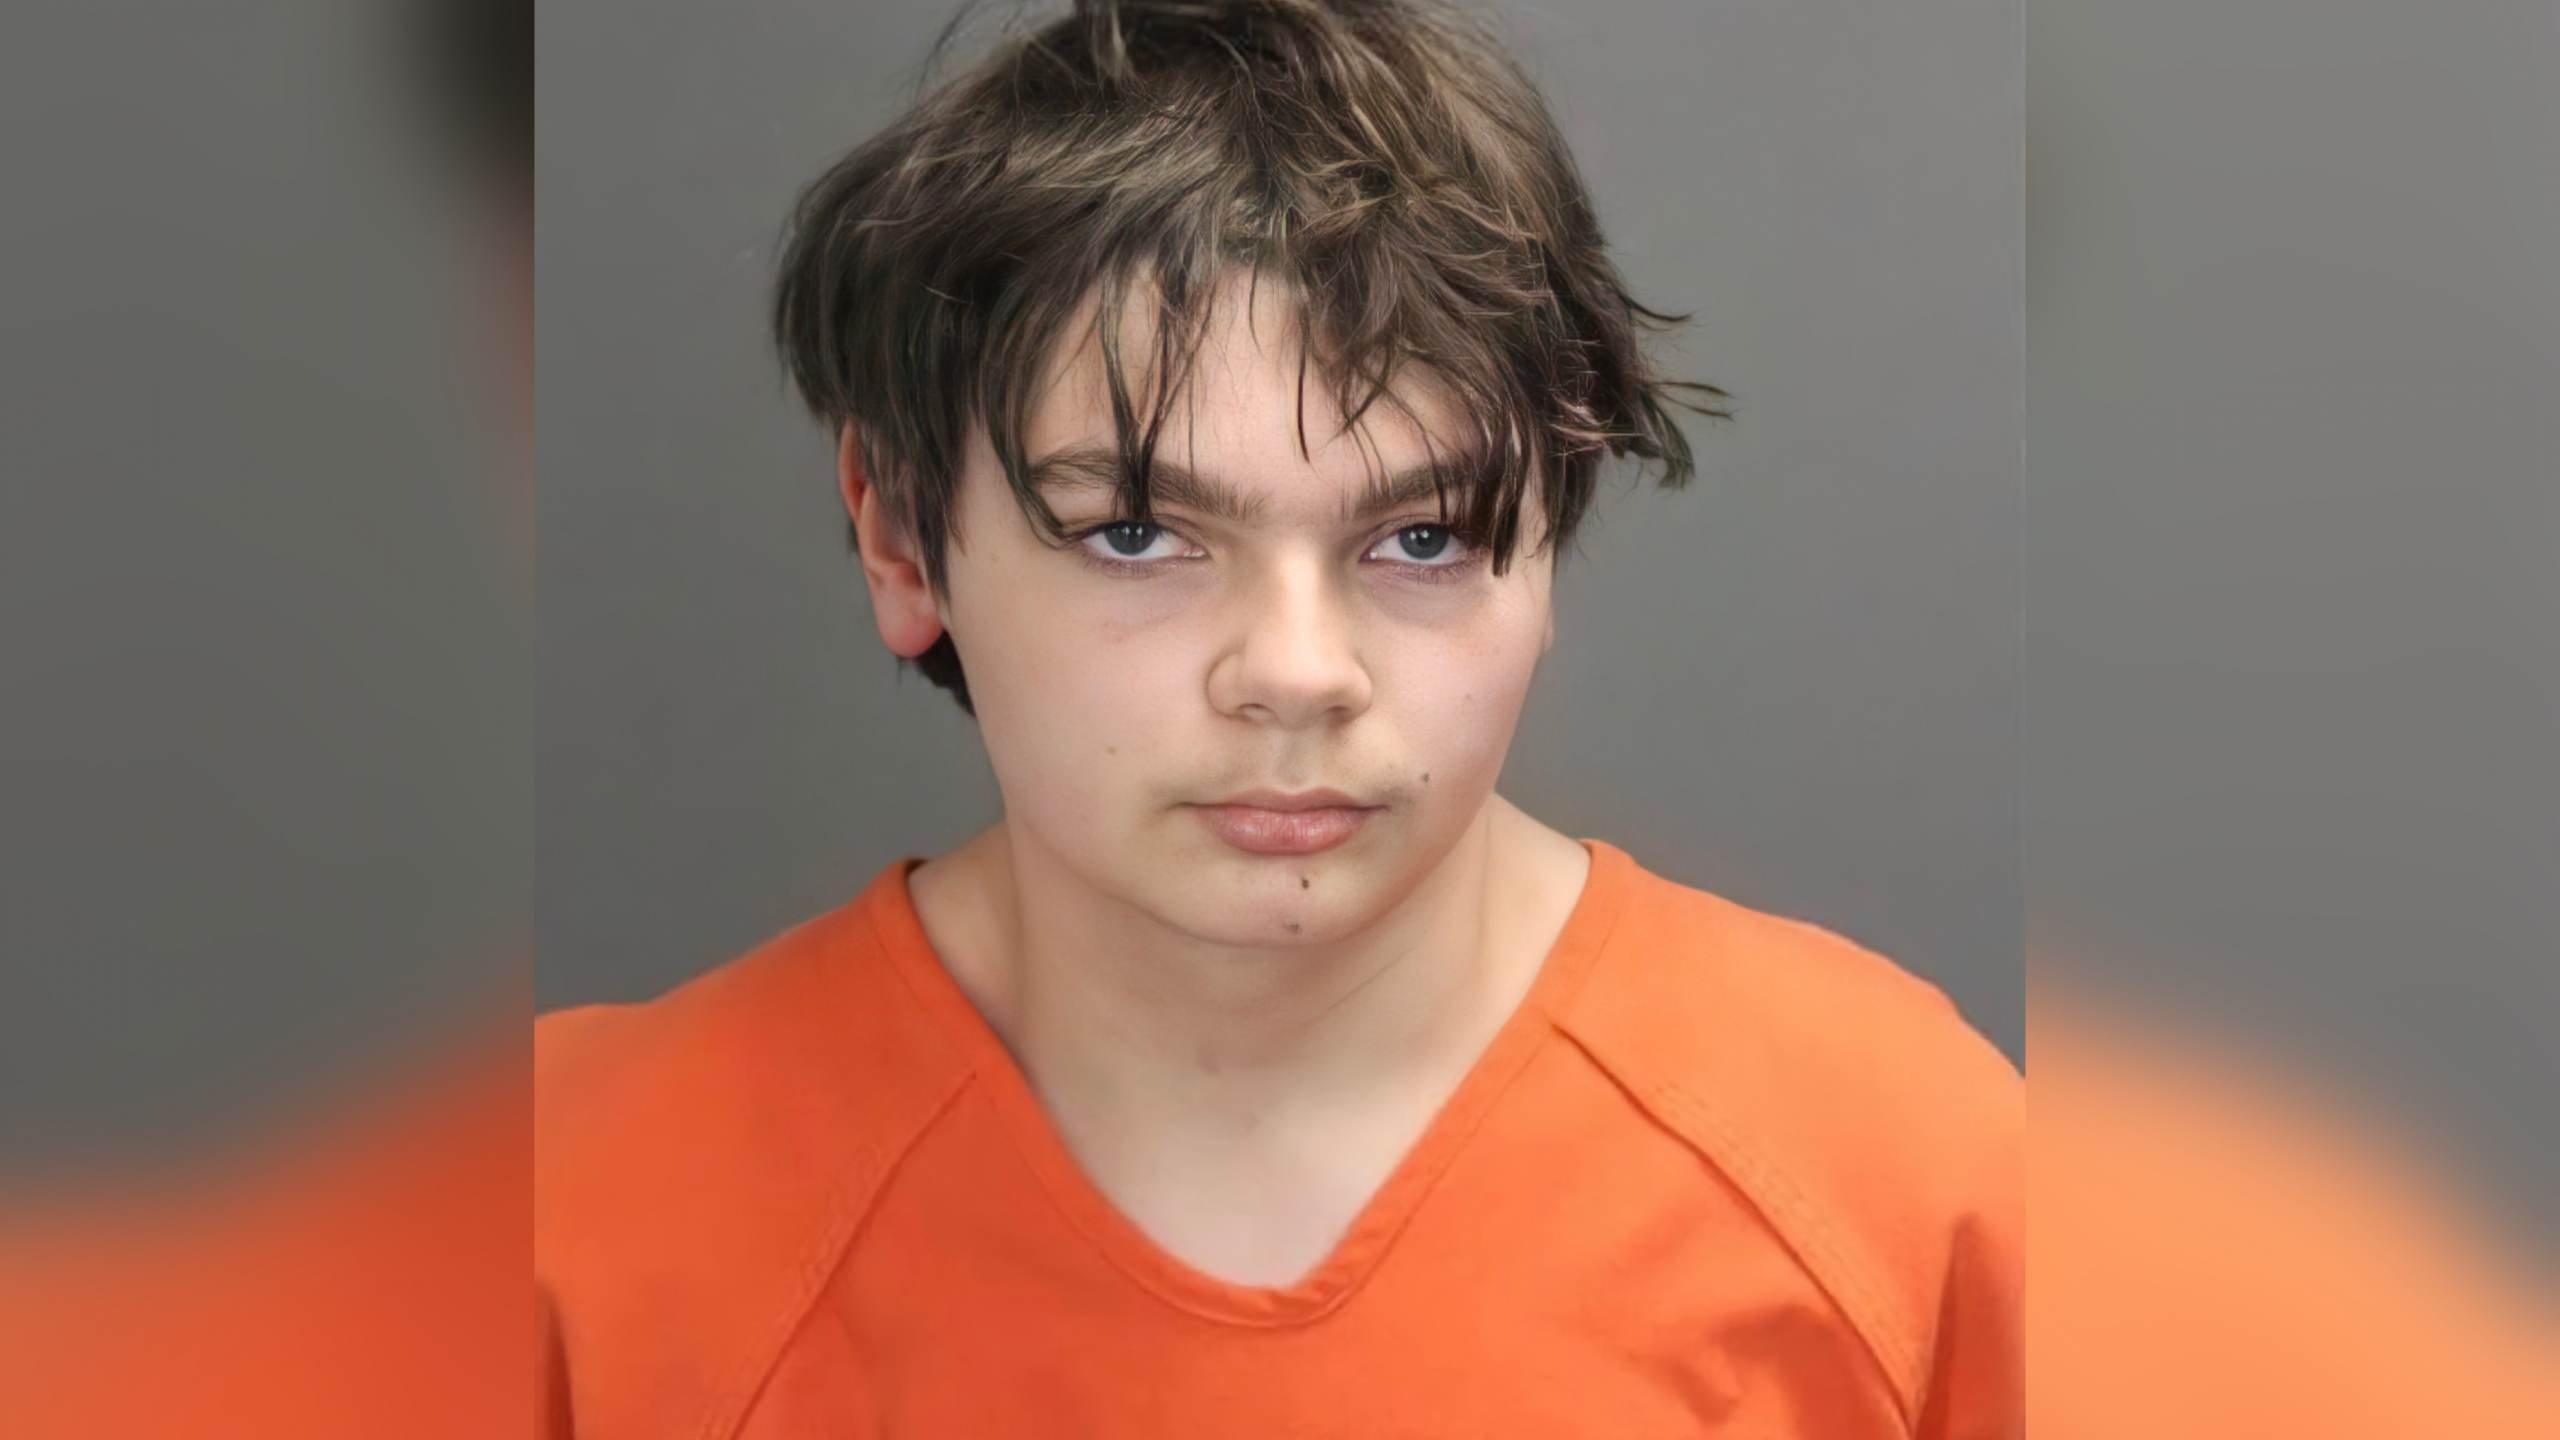 Parents of Michigan Teen Shooter Ethan Crumbley Charged with
4 Counts of Involuntary Manslaughter 1